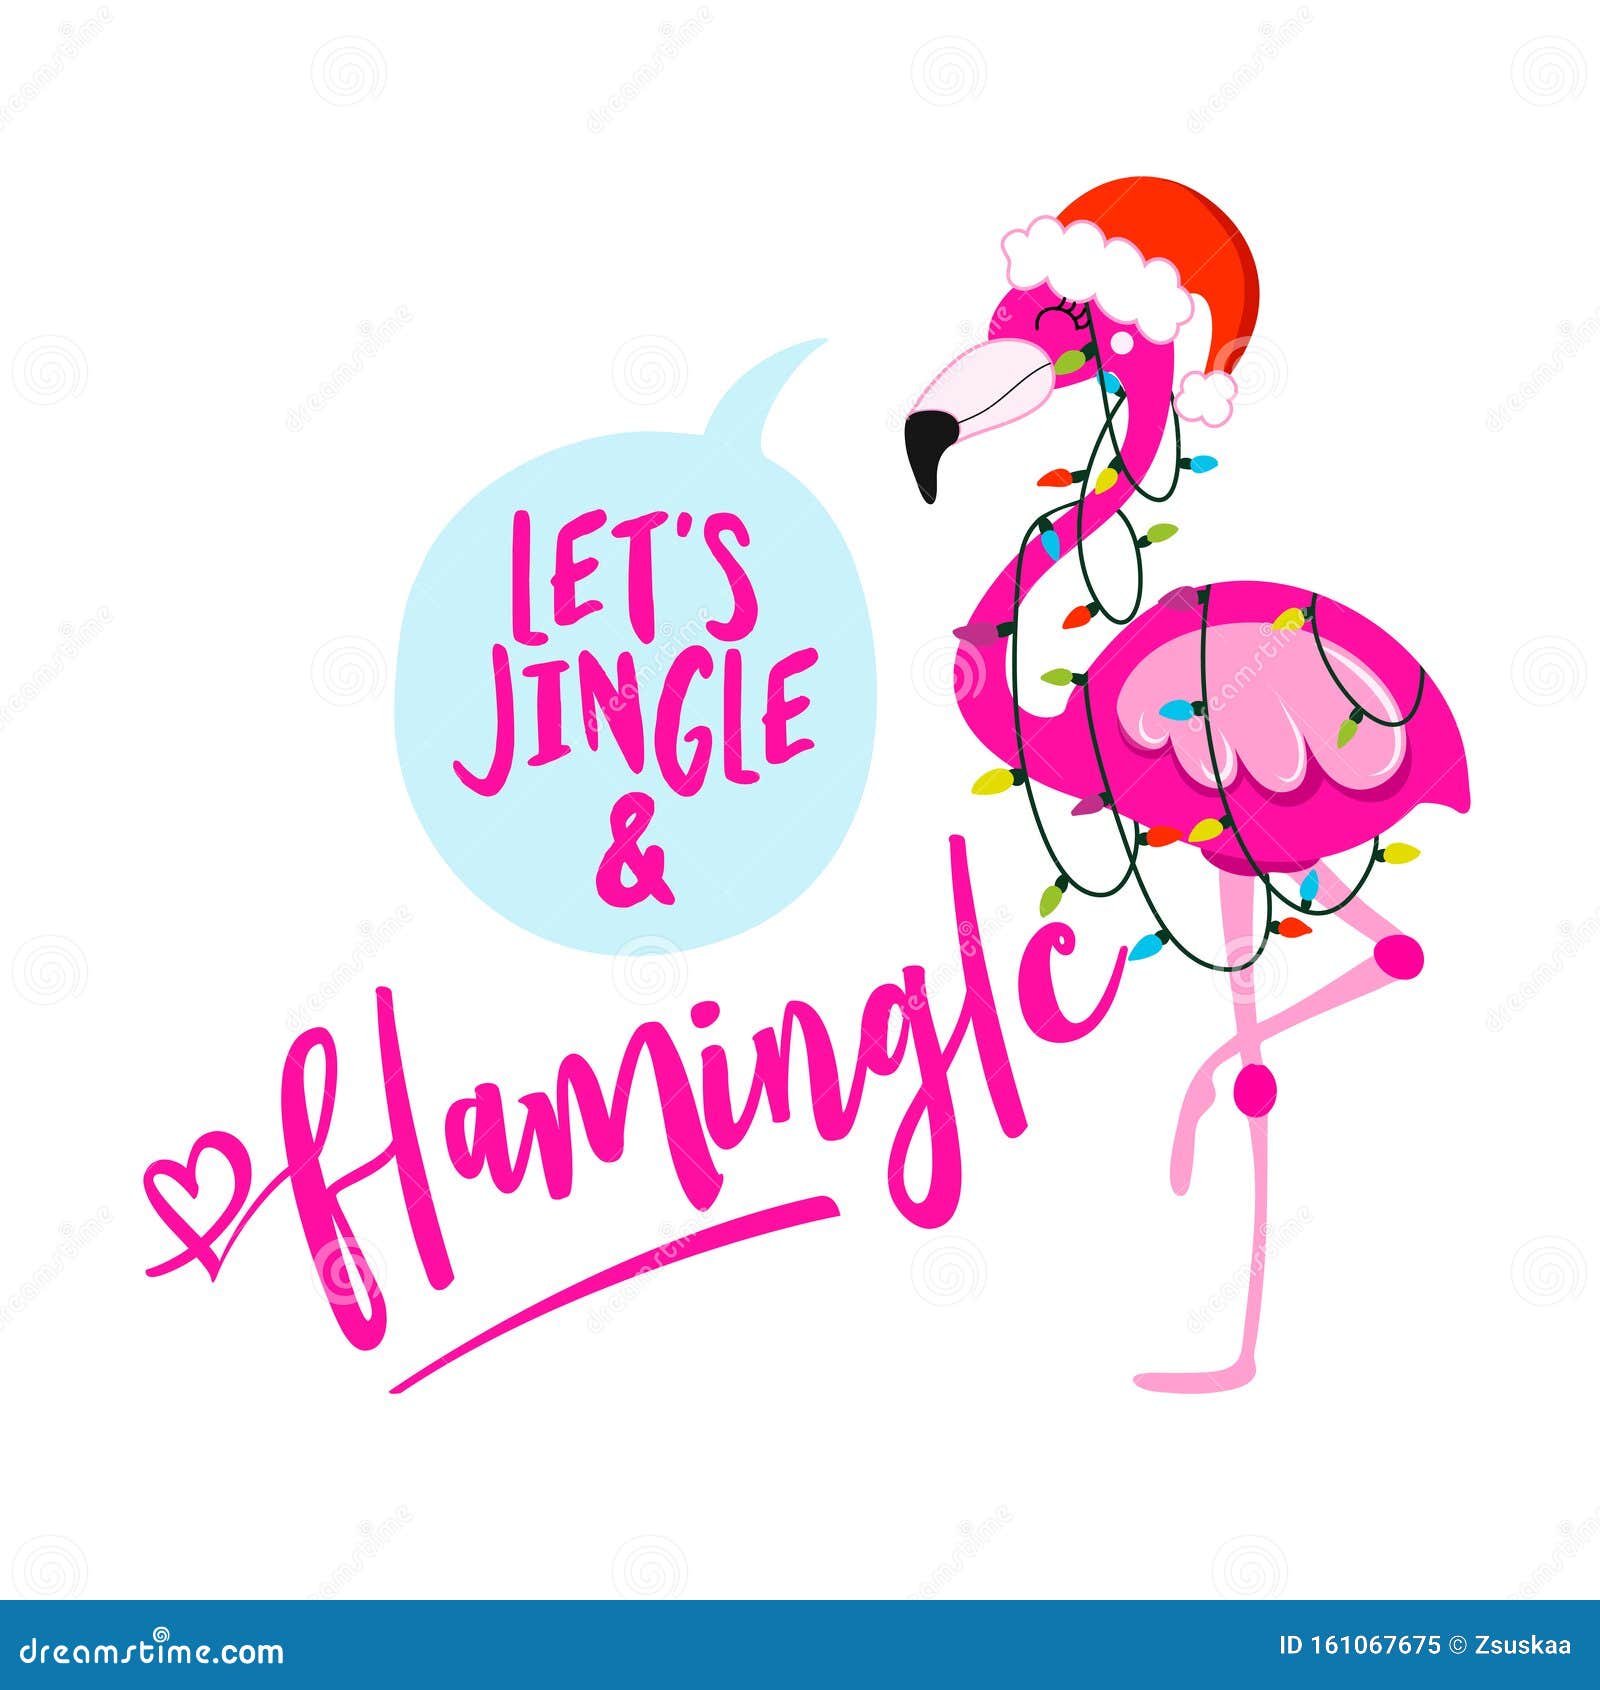 let`s jingle and flamingle - calligraphy phrase for christmas with cute flamingo girl.